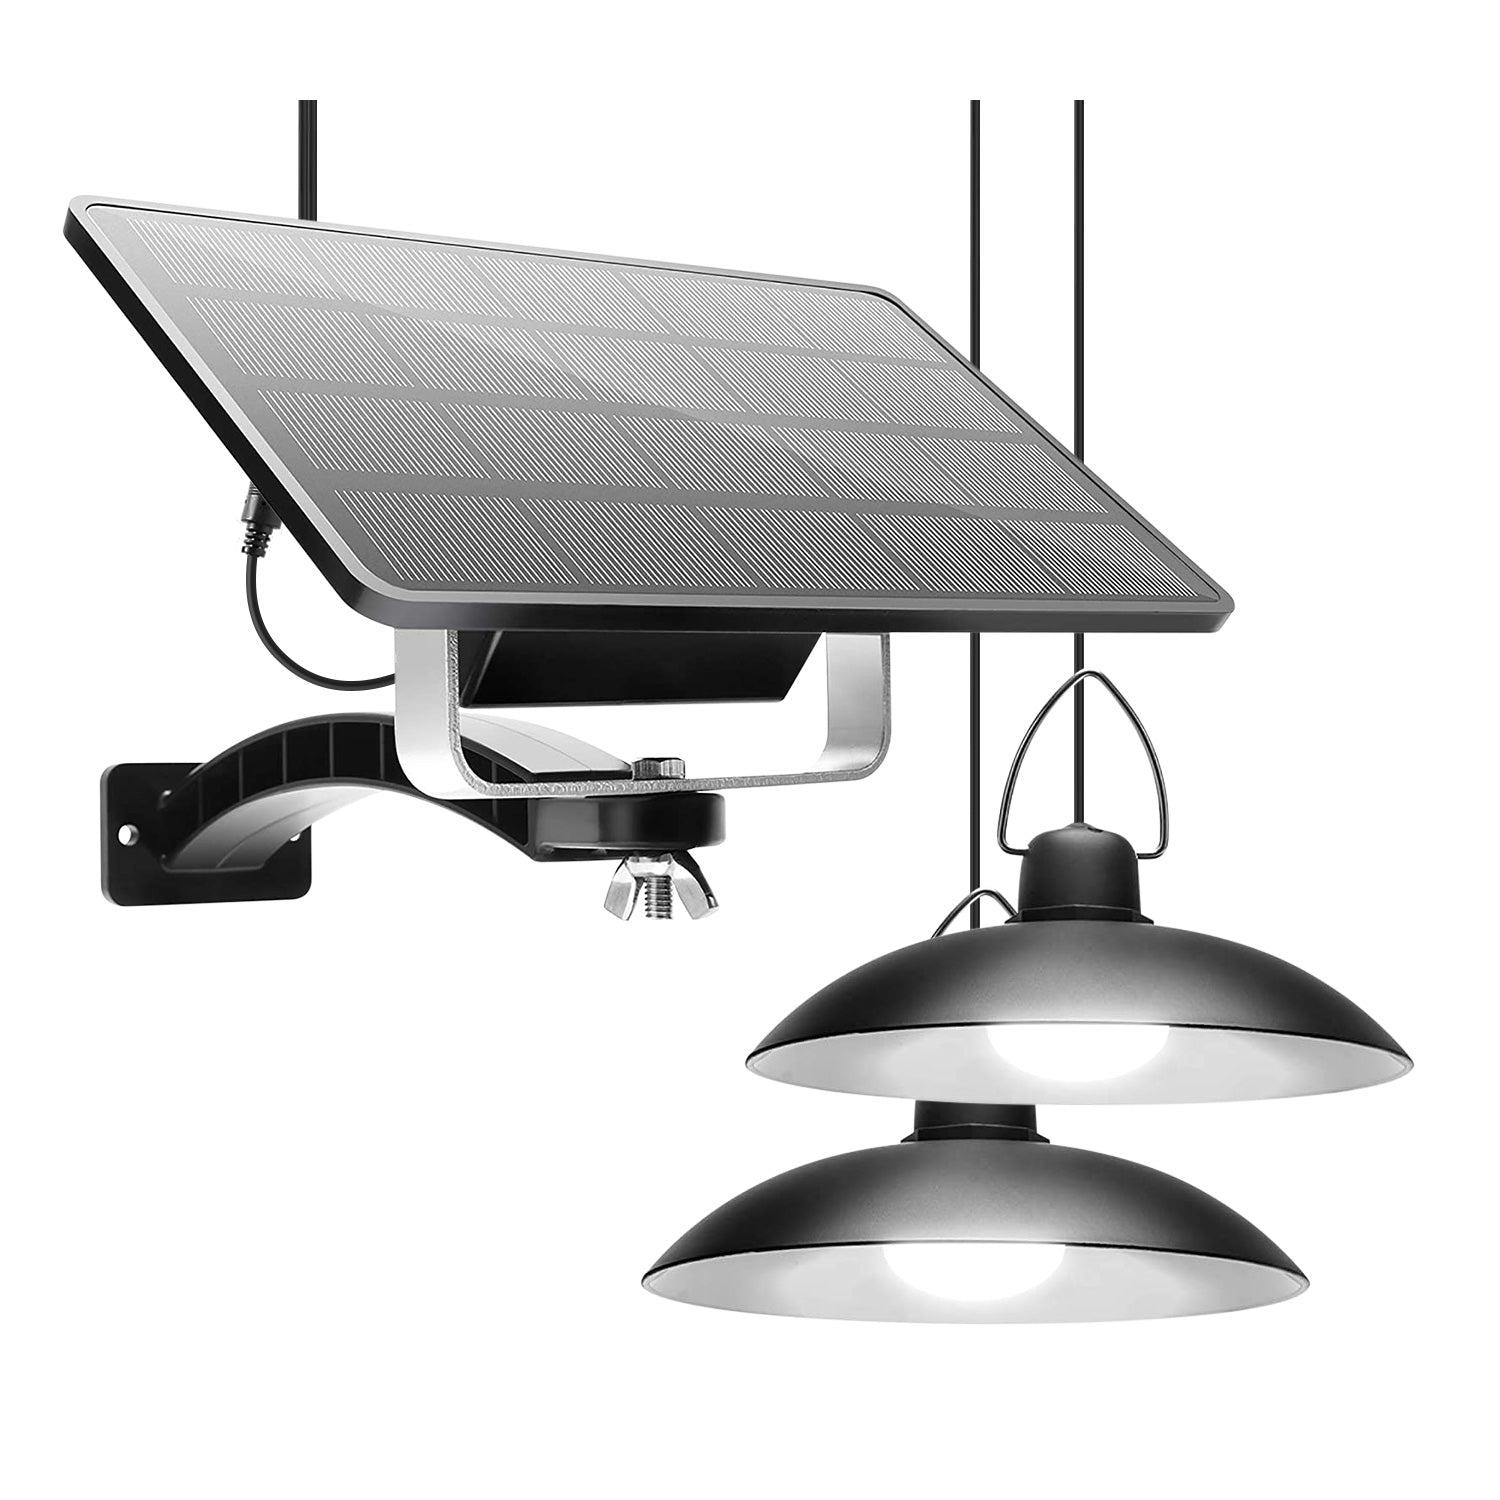 Double Head Solar Pendant Lights with Extension Cords